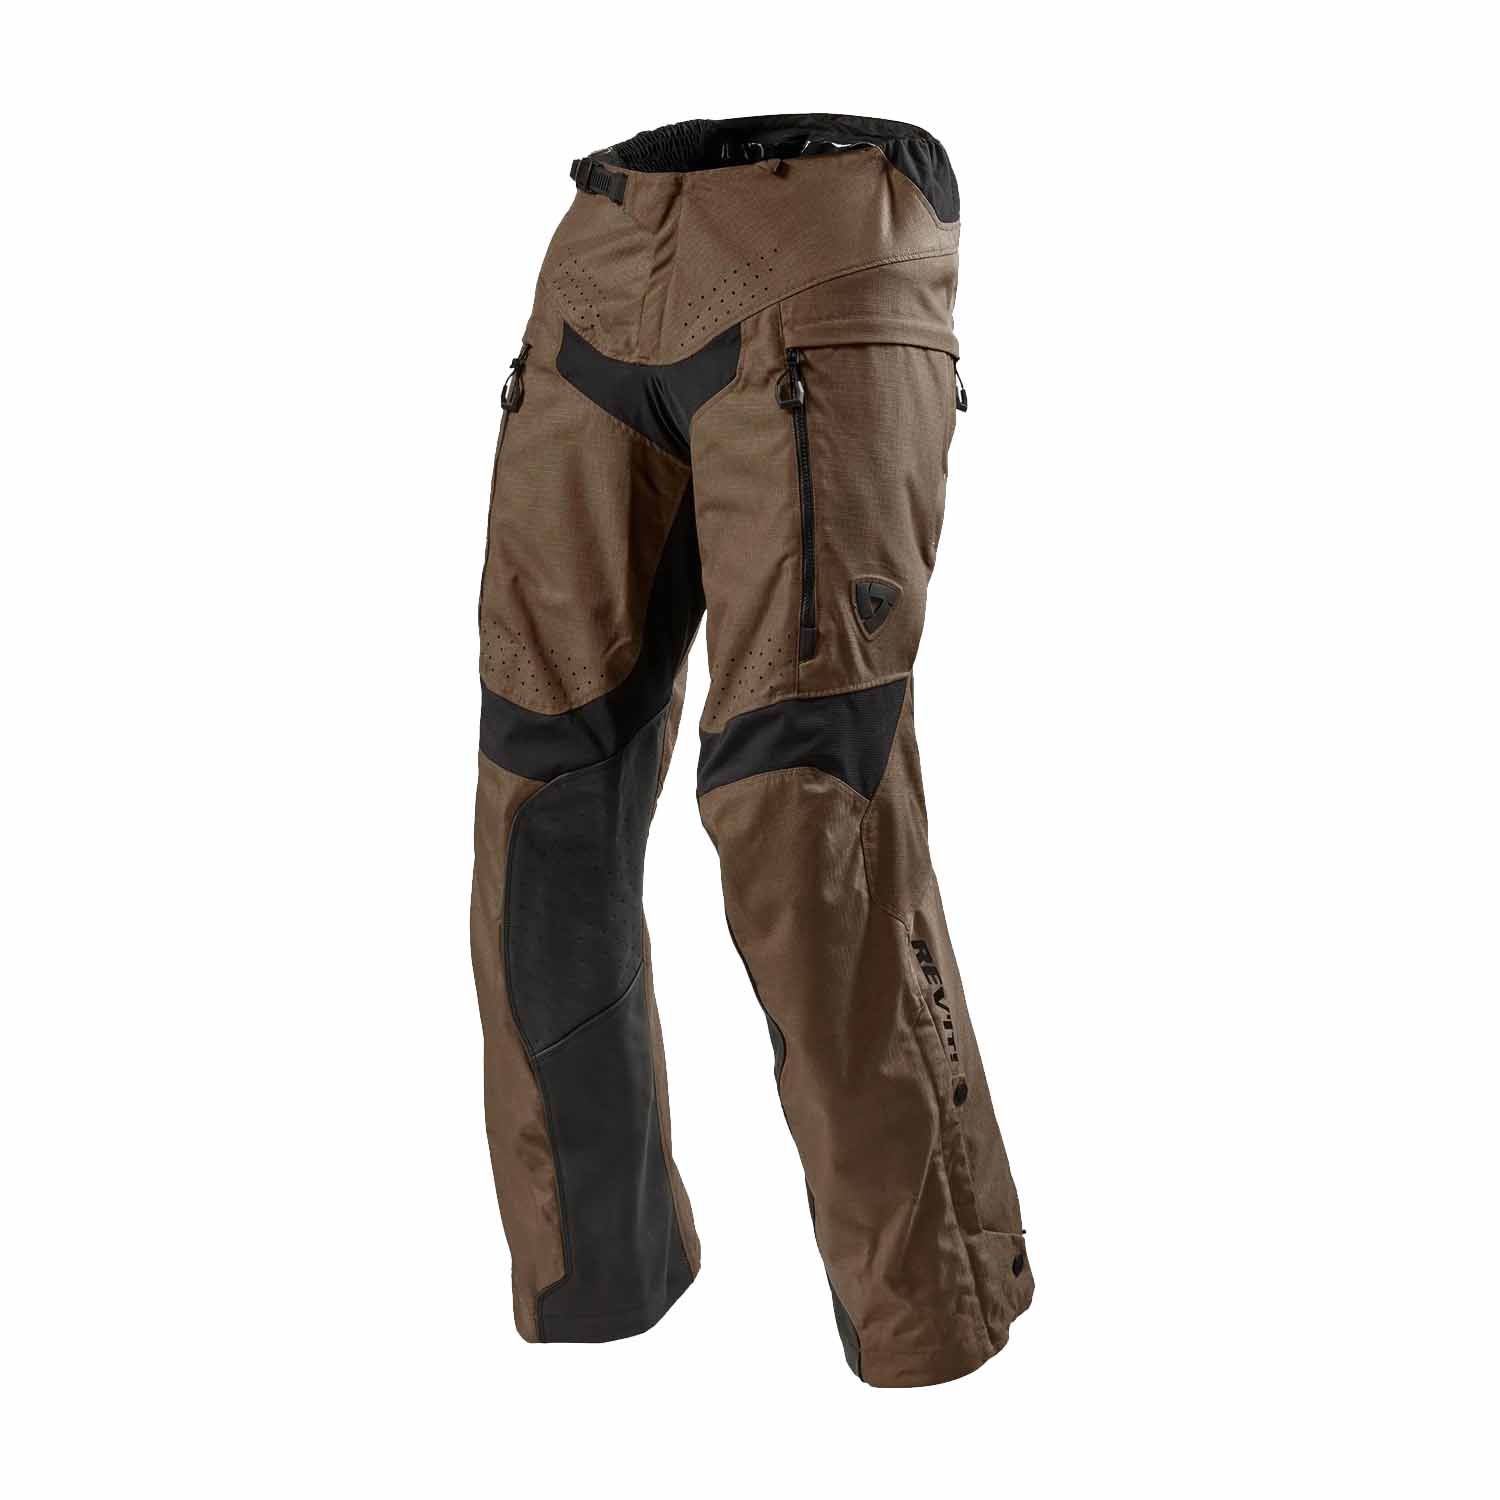 Image of EU REV'IT! Continent Pants Brown Standard Motorcycle Pants Taille XL